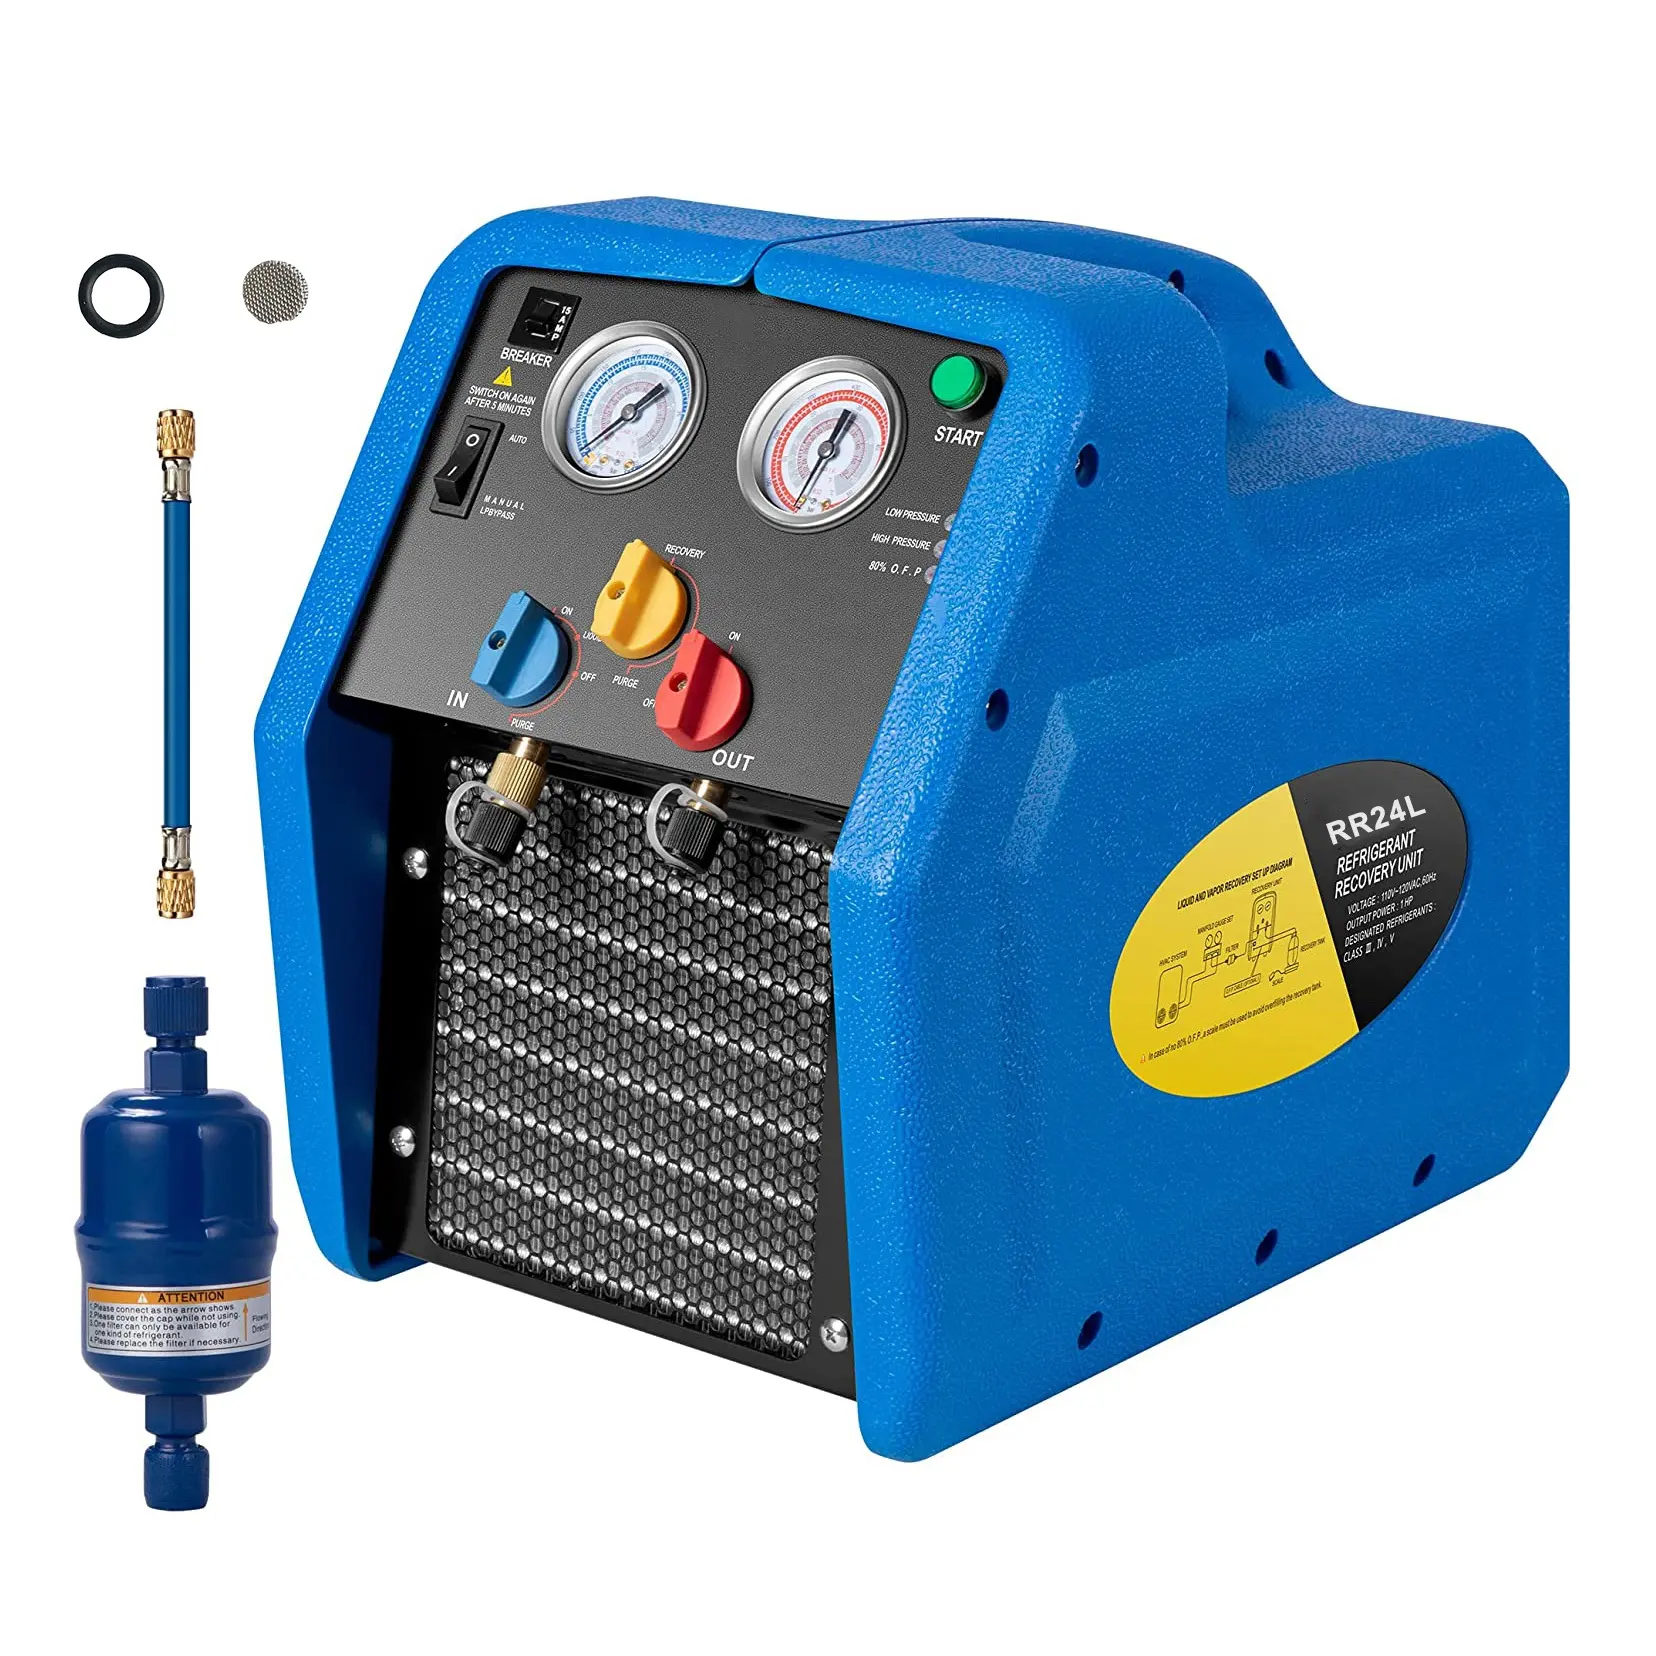 Portable 558psi Oil-less Refrigerant Recovery Machine for Both Liquid and Vapor Refrigerant Air Conditioning Repair Tool